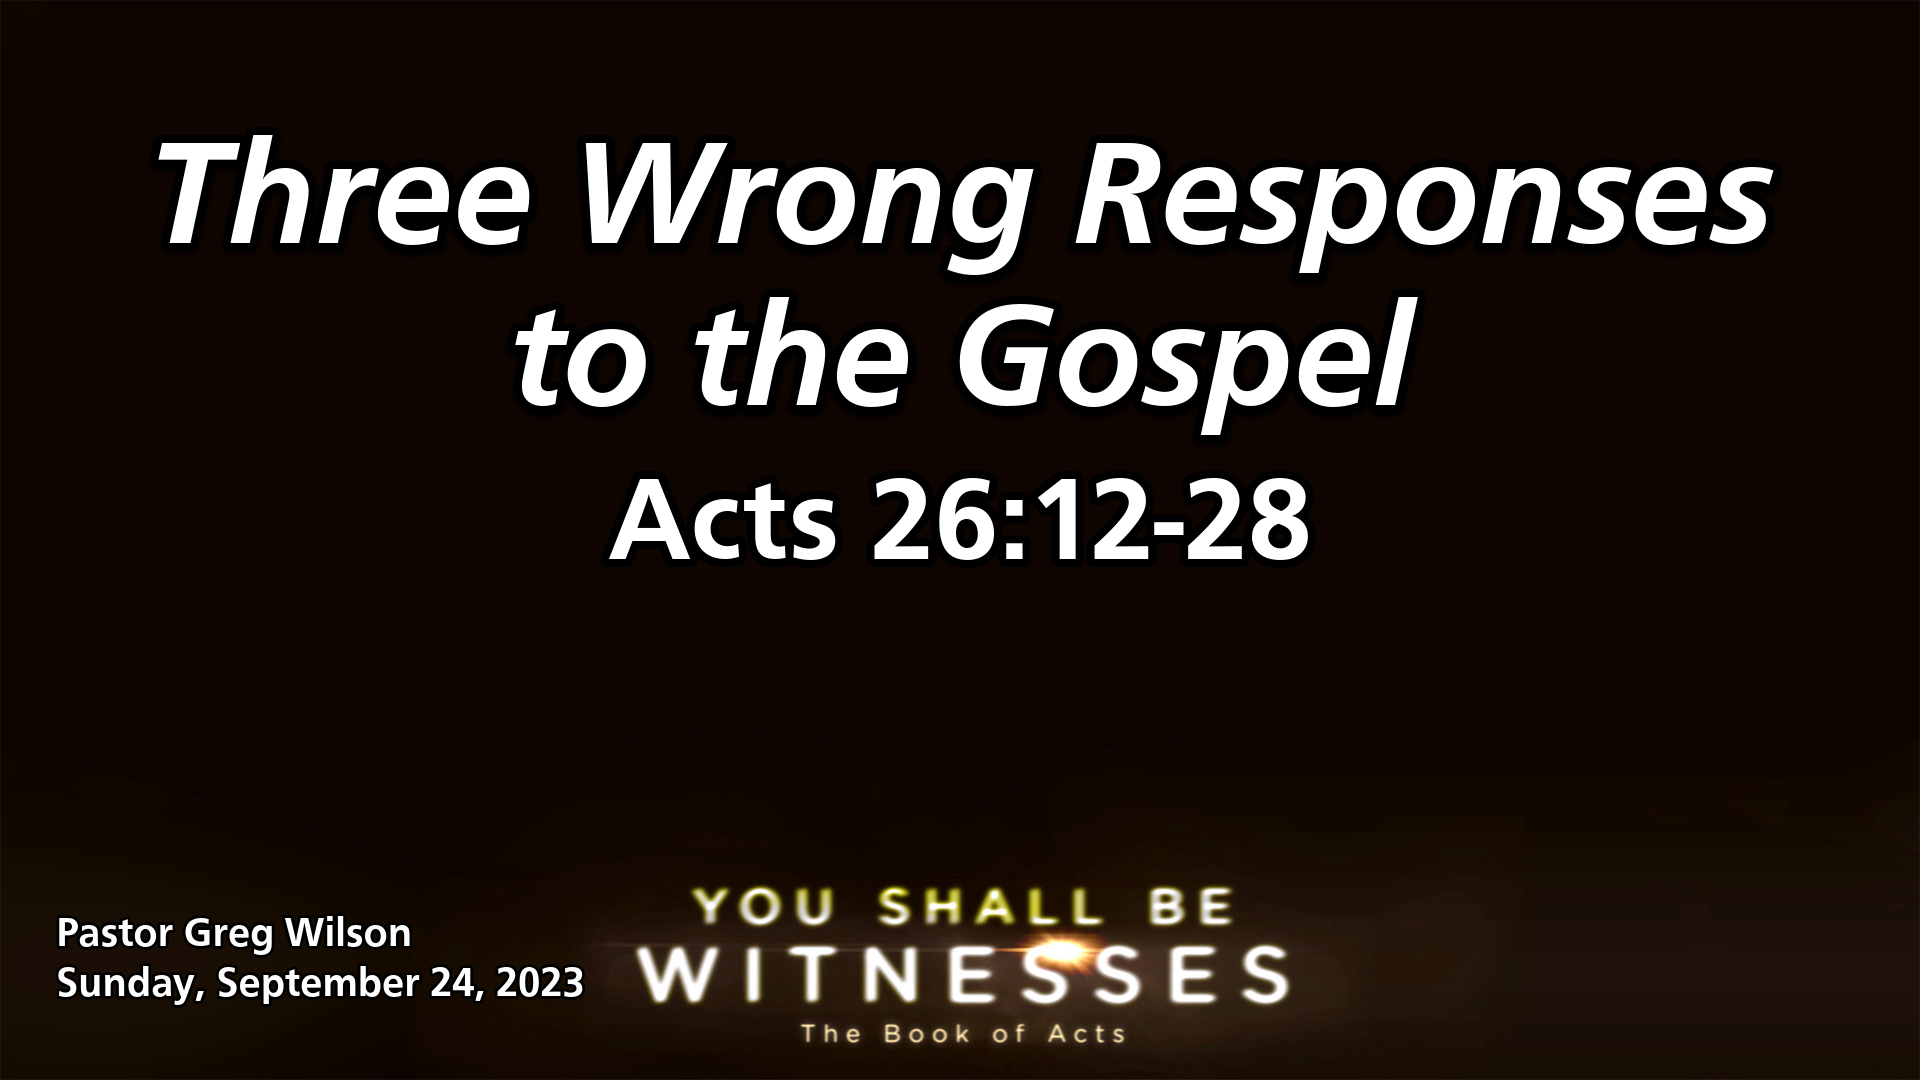 "Three Wrong Responses to the Gospel"